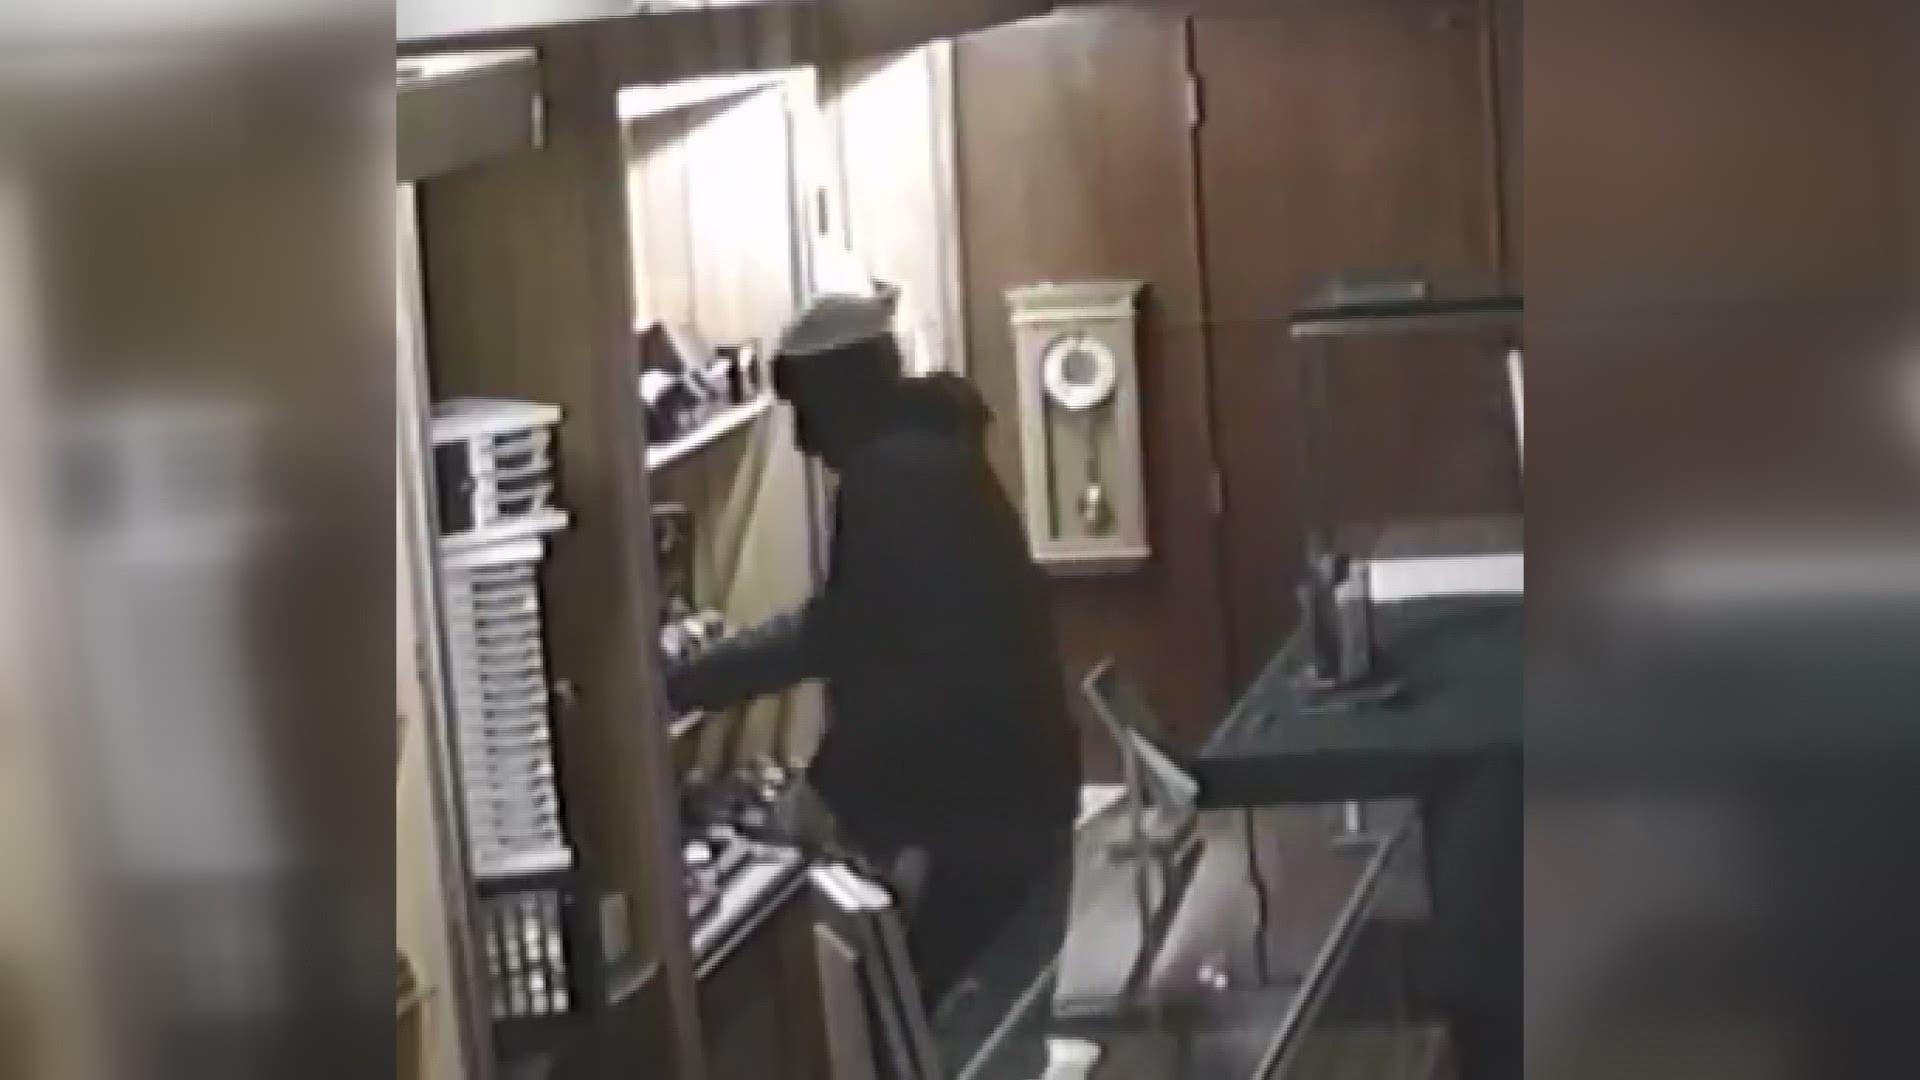 Police in Grand Rapids are looking for help from the community after a jewelry store break-in.